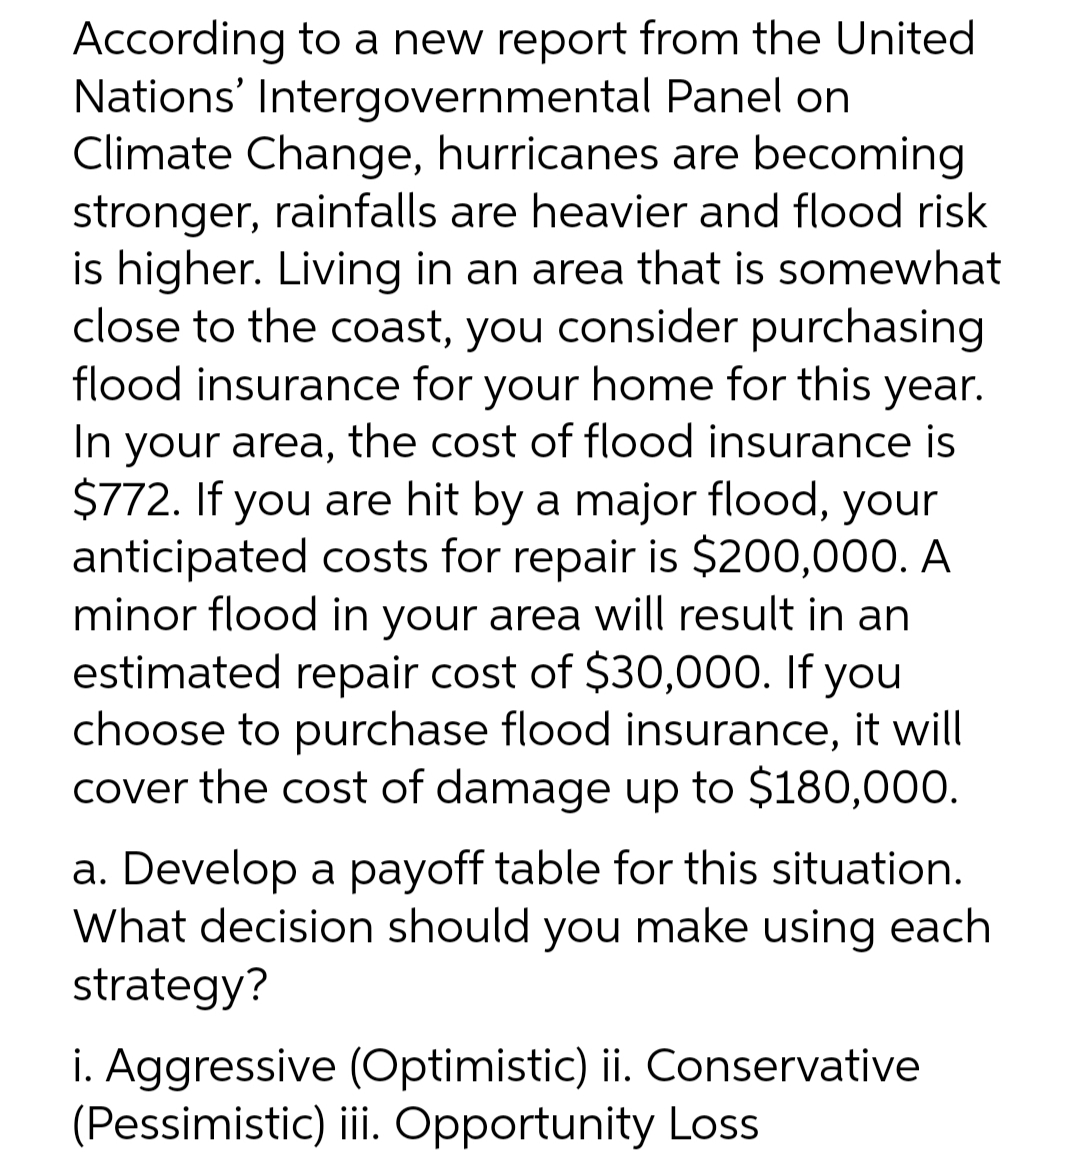 According to a new report from the United
Nations' Intergovernmental Panel on
Climate Change, hurricanes are becoming
stronger, rainfalls are heavier and flood risk
is higher. Living in an area that is somewhat
close to the coast, you consider purchasing
flood insurance for your home for this year.
In your area, the cost of flood insurance is
$772. If you are hit by a major flood, your
anticipated costs for repair is $200,000. A
minor flood in your area will result in an
estimated repair cost of $30,000. If you
choose to purchase flood insurance, it will
cover the cost of damage up to $180,000.
a. Develop a payoff table for this situation.
What decision should you make using each
strategy?
i. Aggressive (Optimistic) ii. Conservative
(Pessimistic) ii Opportunity Loss
